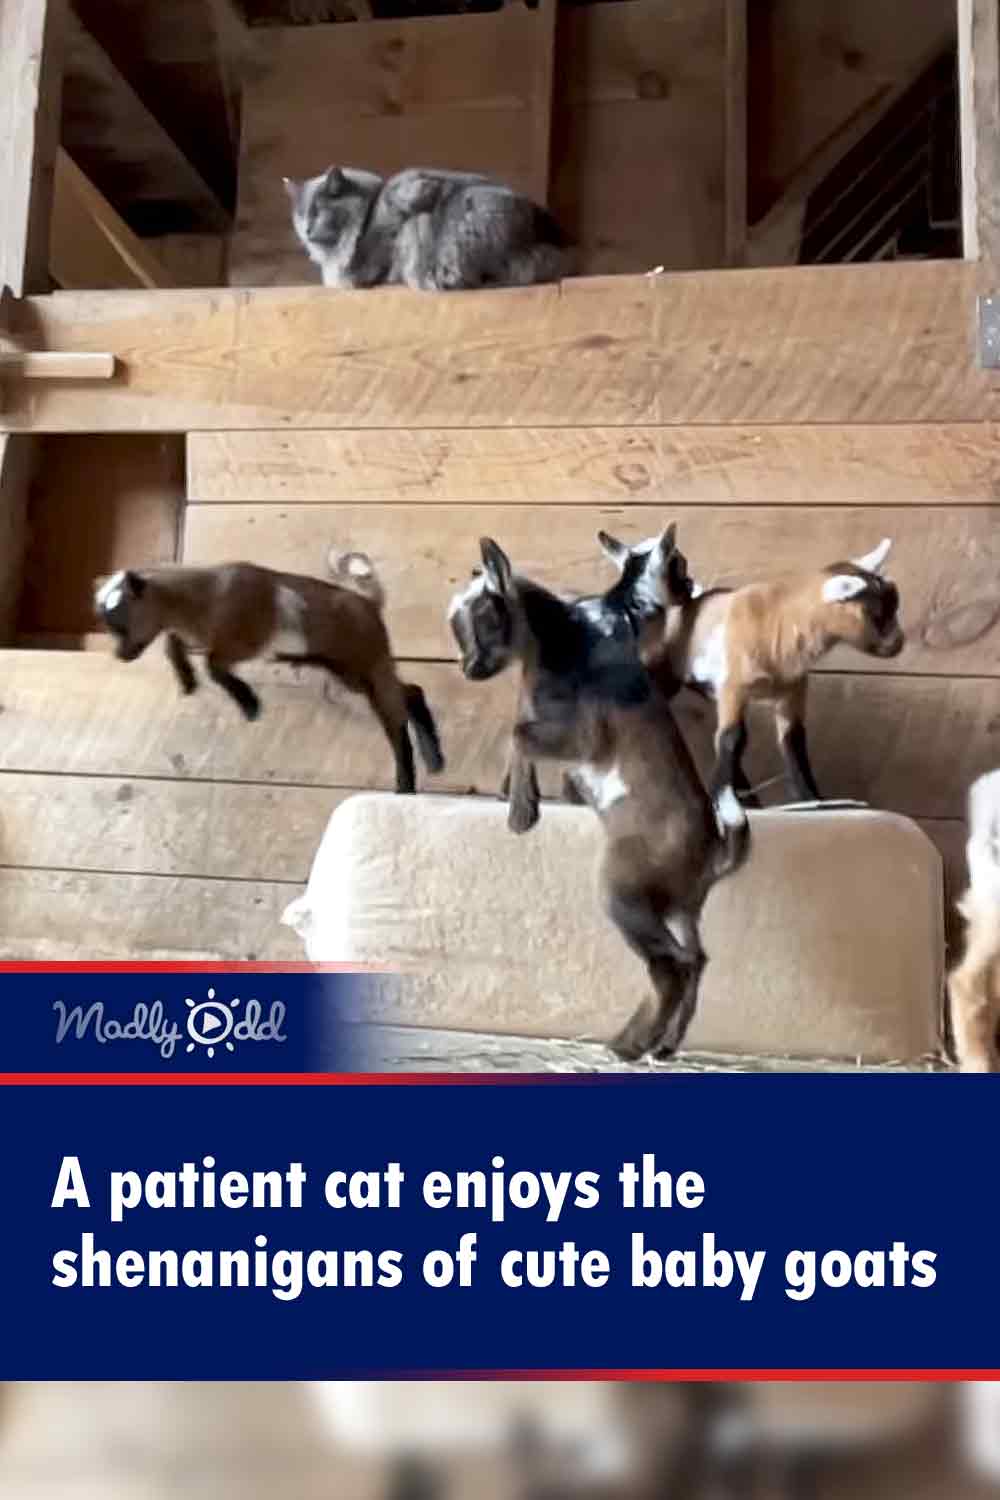 A patient cat enjoys the shenanigans of cute baby goats